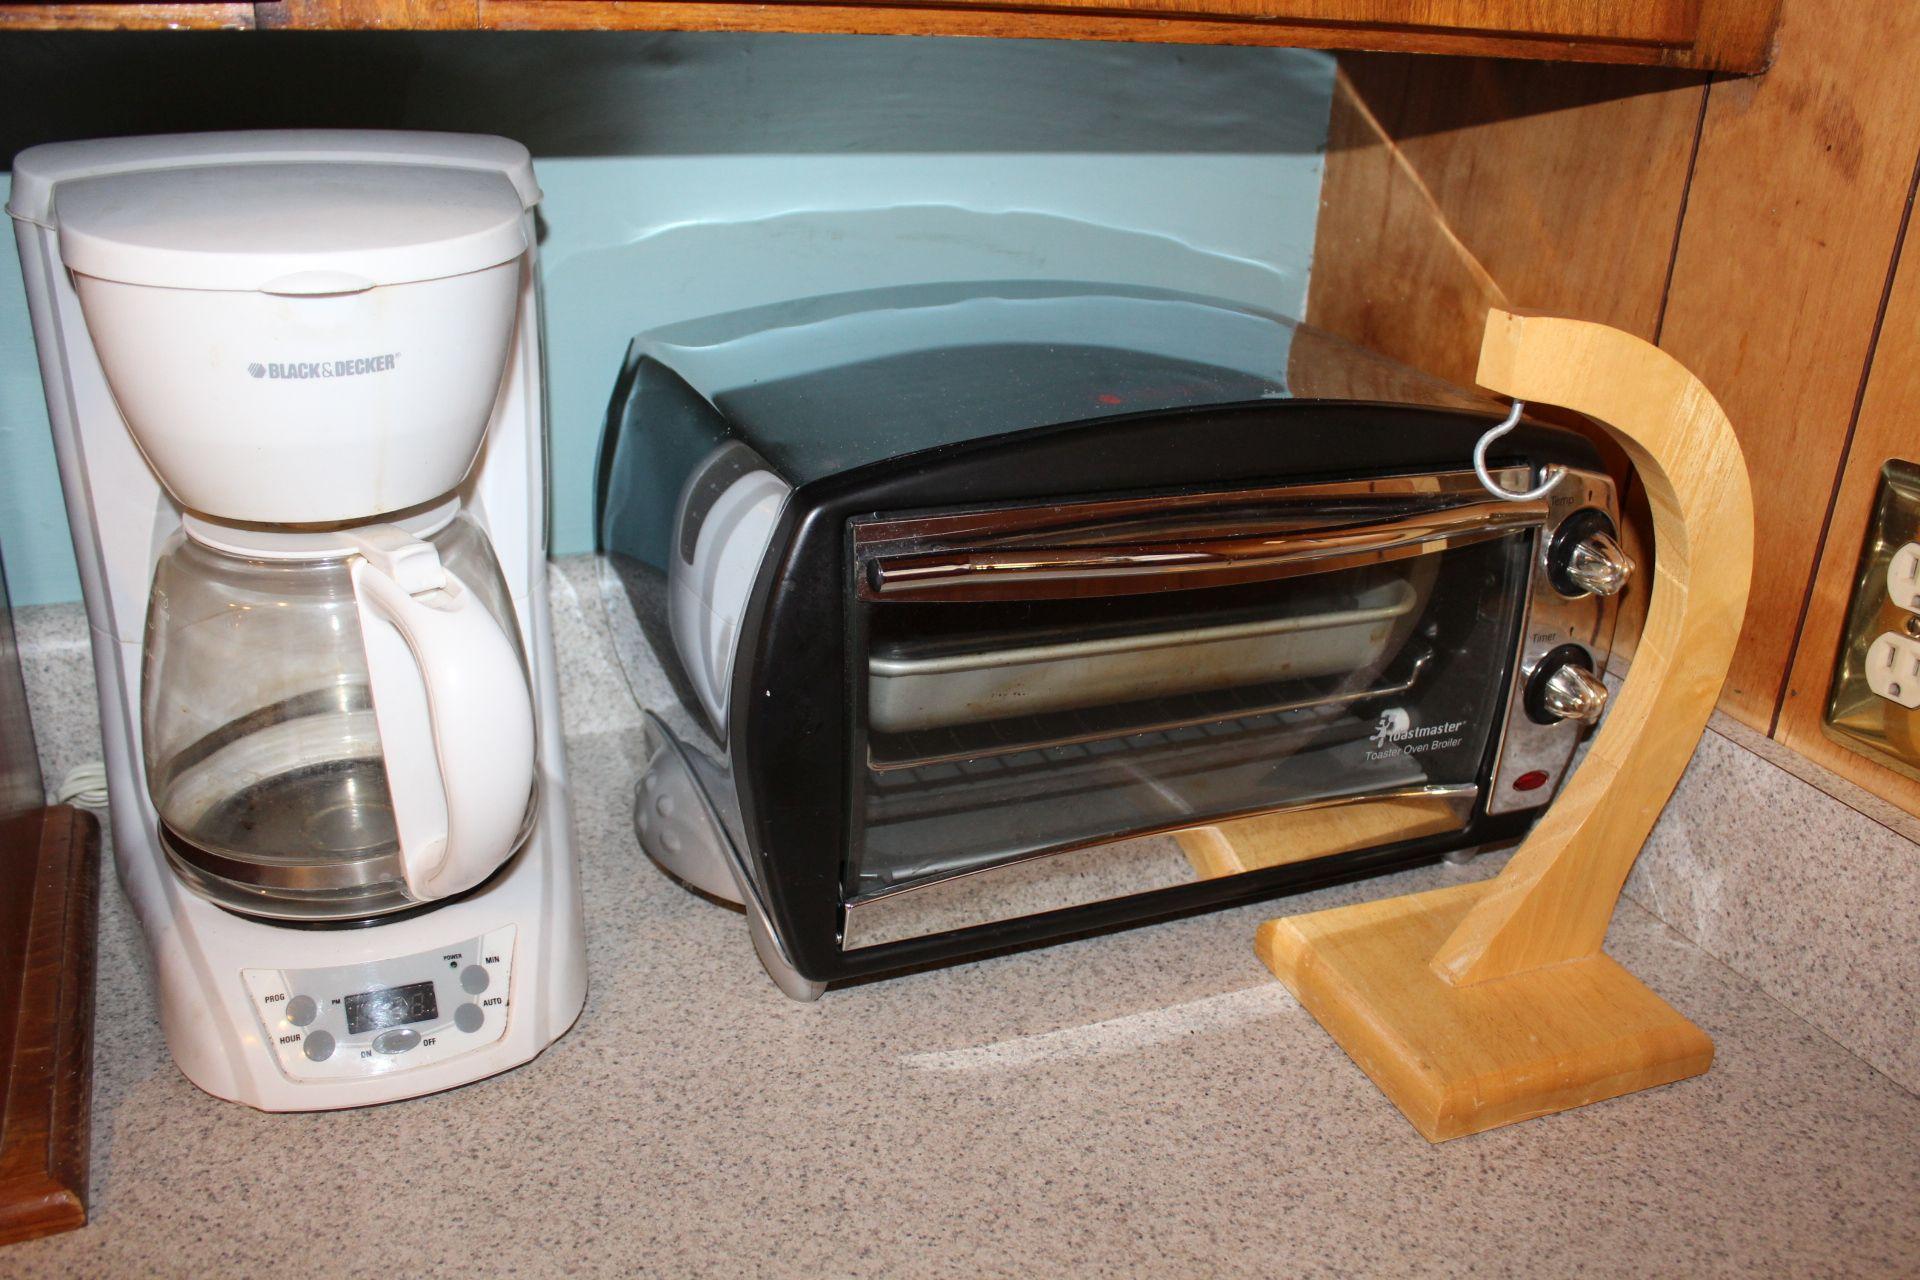 Toastmaster Oven, Bread Box and B&D Coffee Maker.